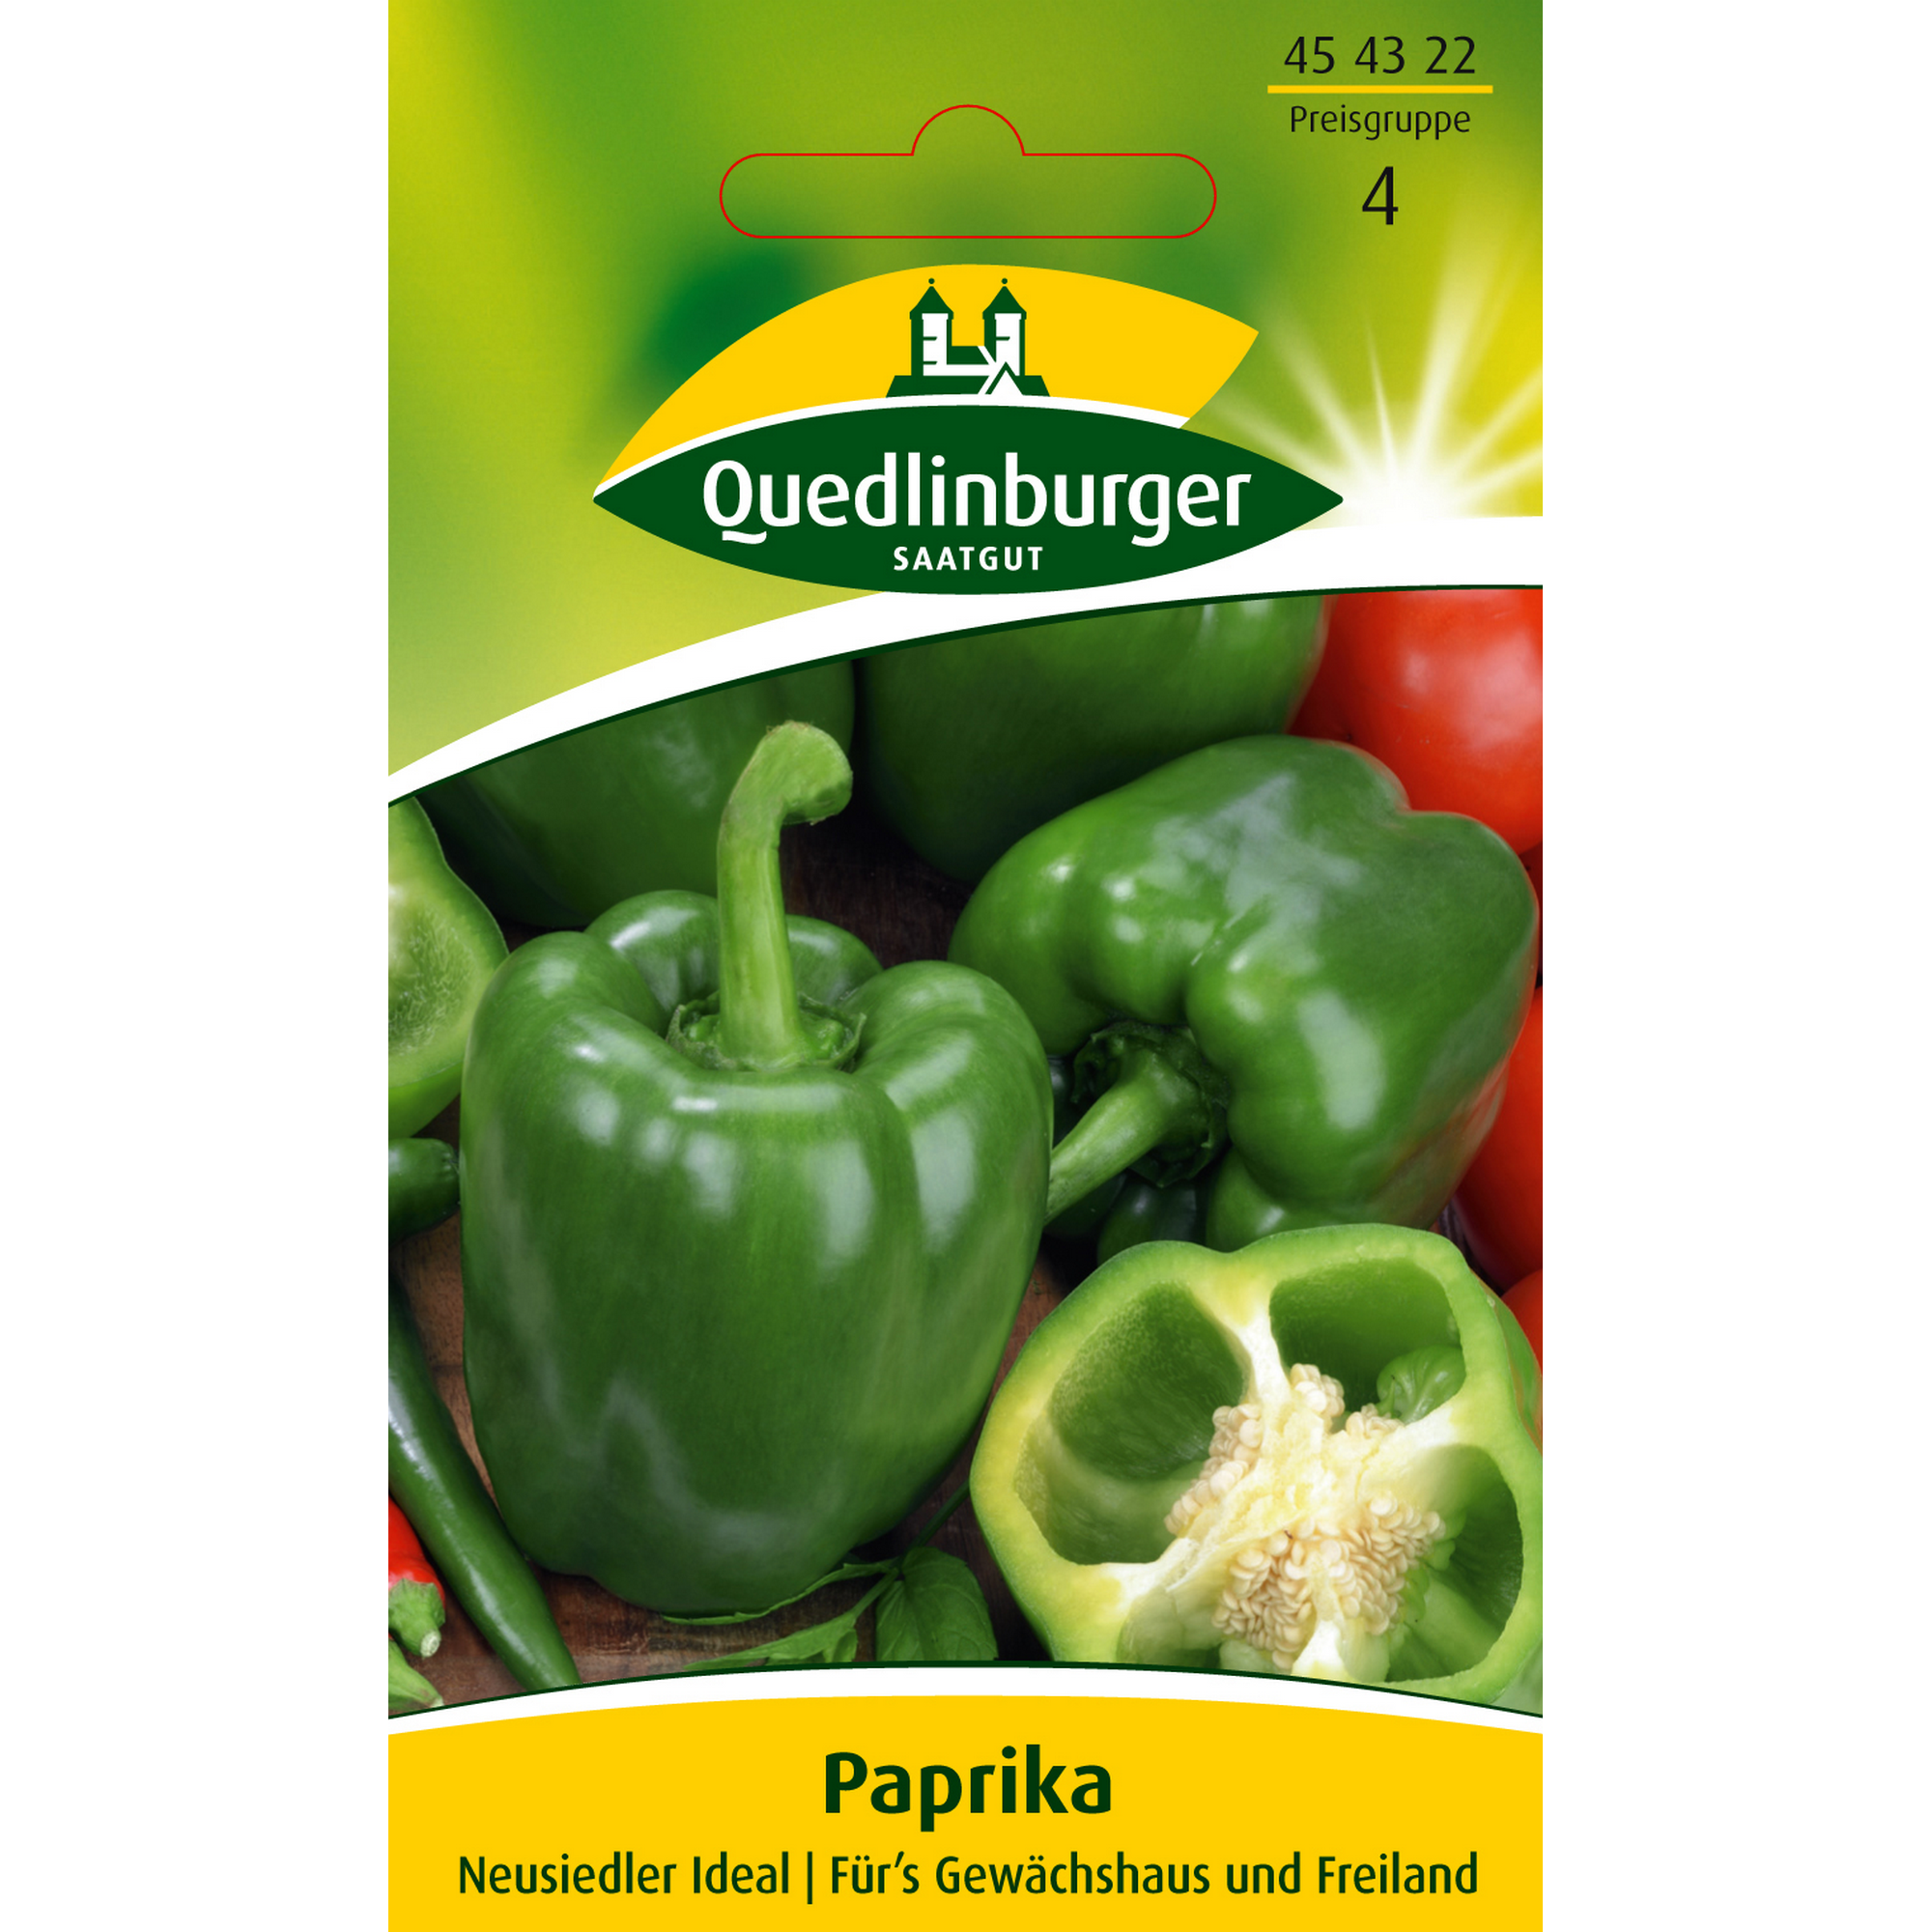 Paprika 'Neusiedler Ideal' + product picture